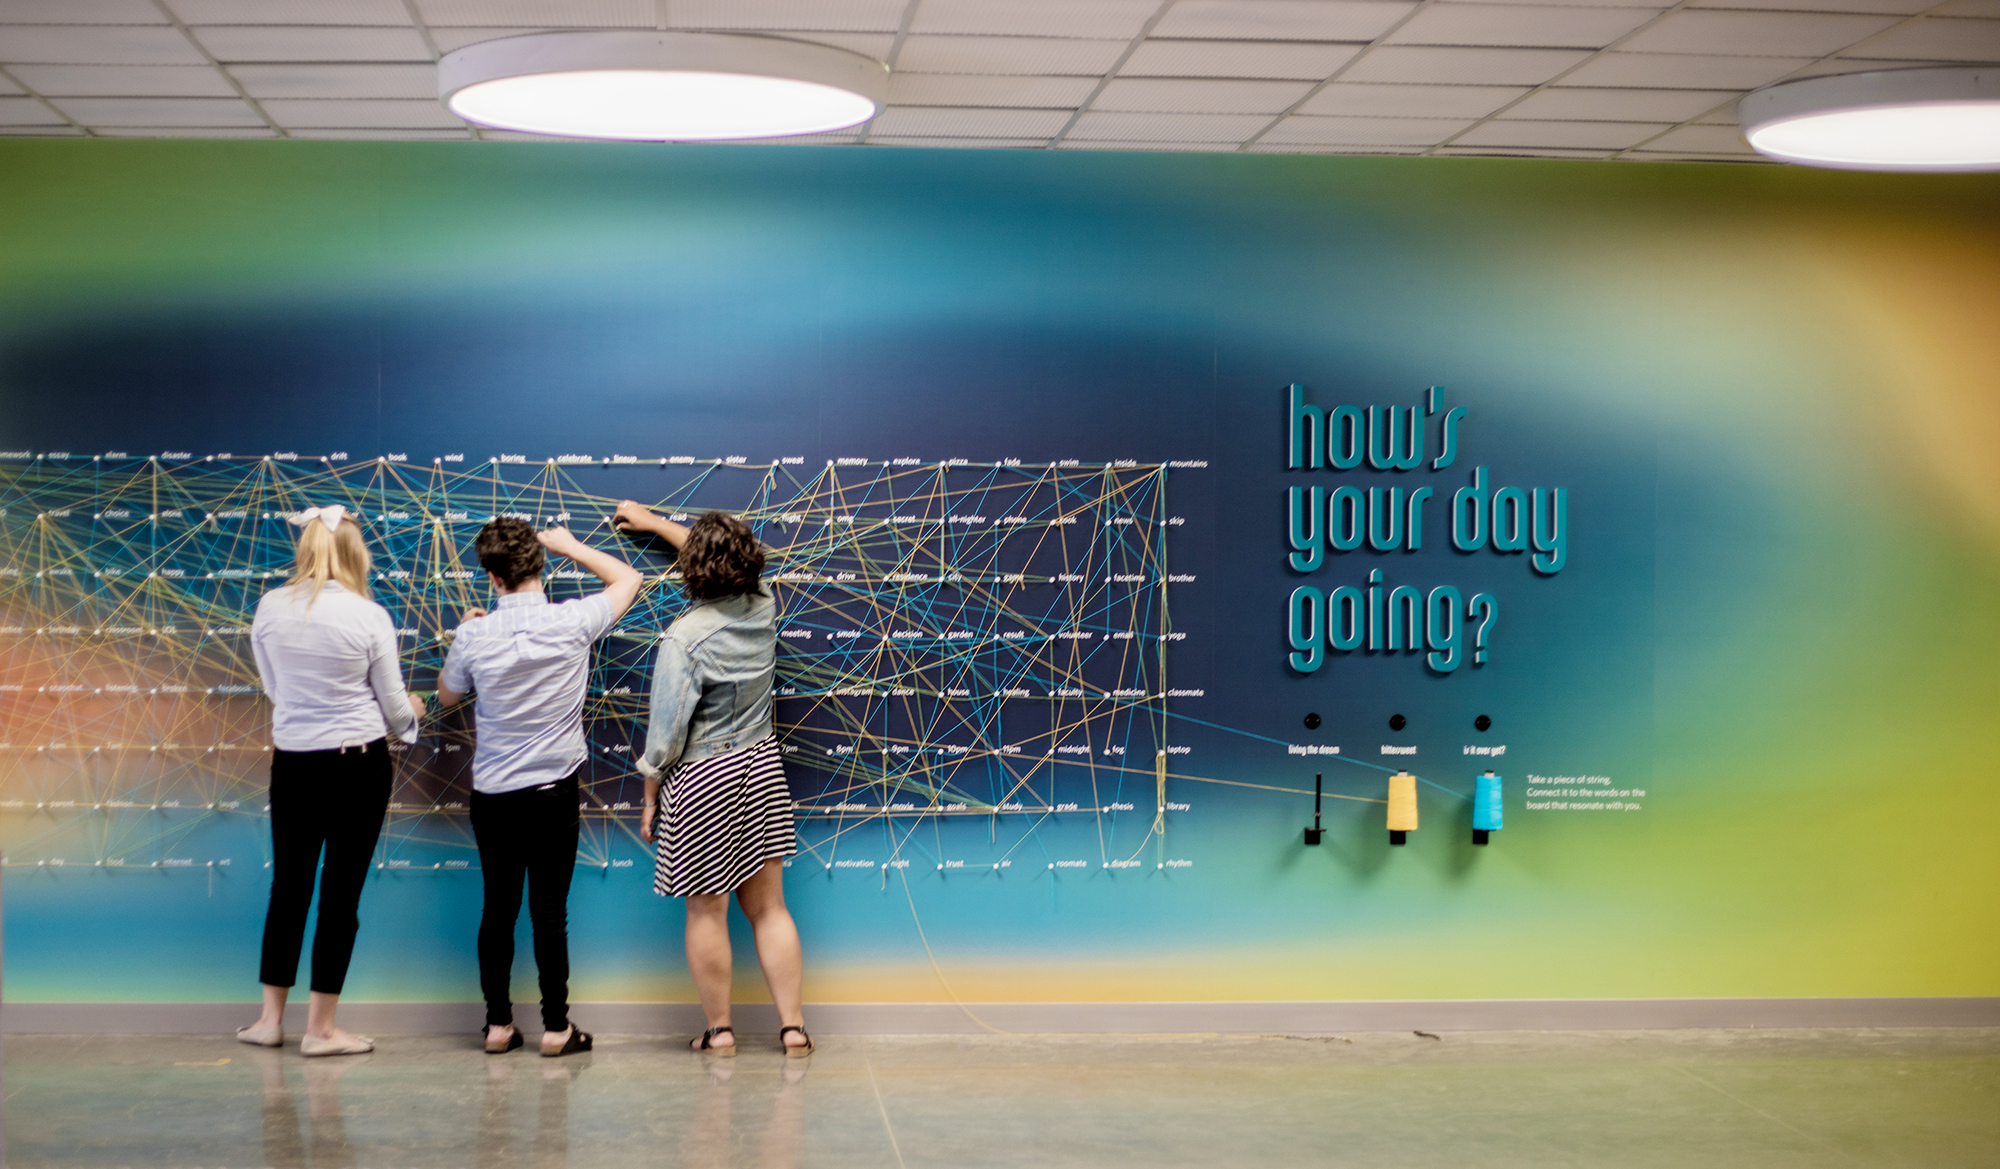 3 students interacting with the "hows your day going" wall at the ubc life building